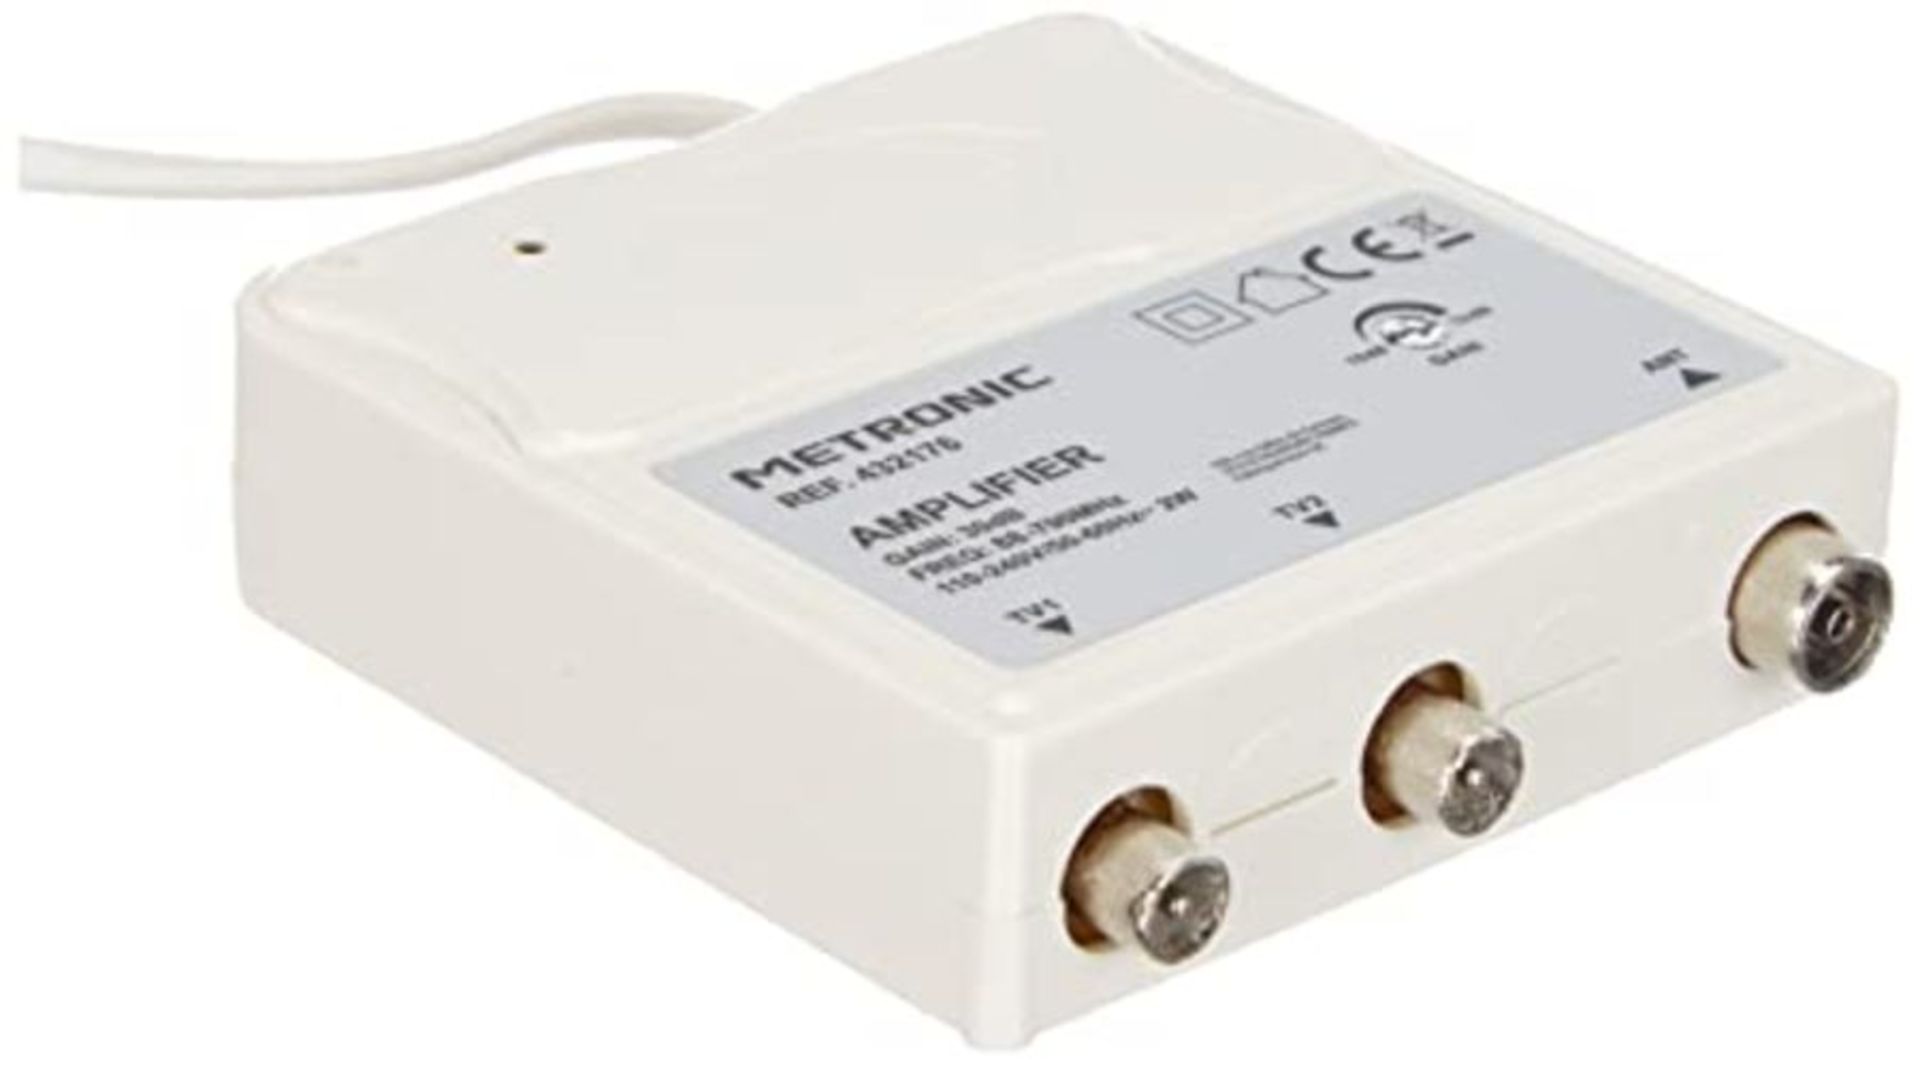 Metronic 432176 Internal Amplifier with Gain Control FM-UHF Max. 30 dB 4G Protection D